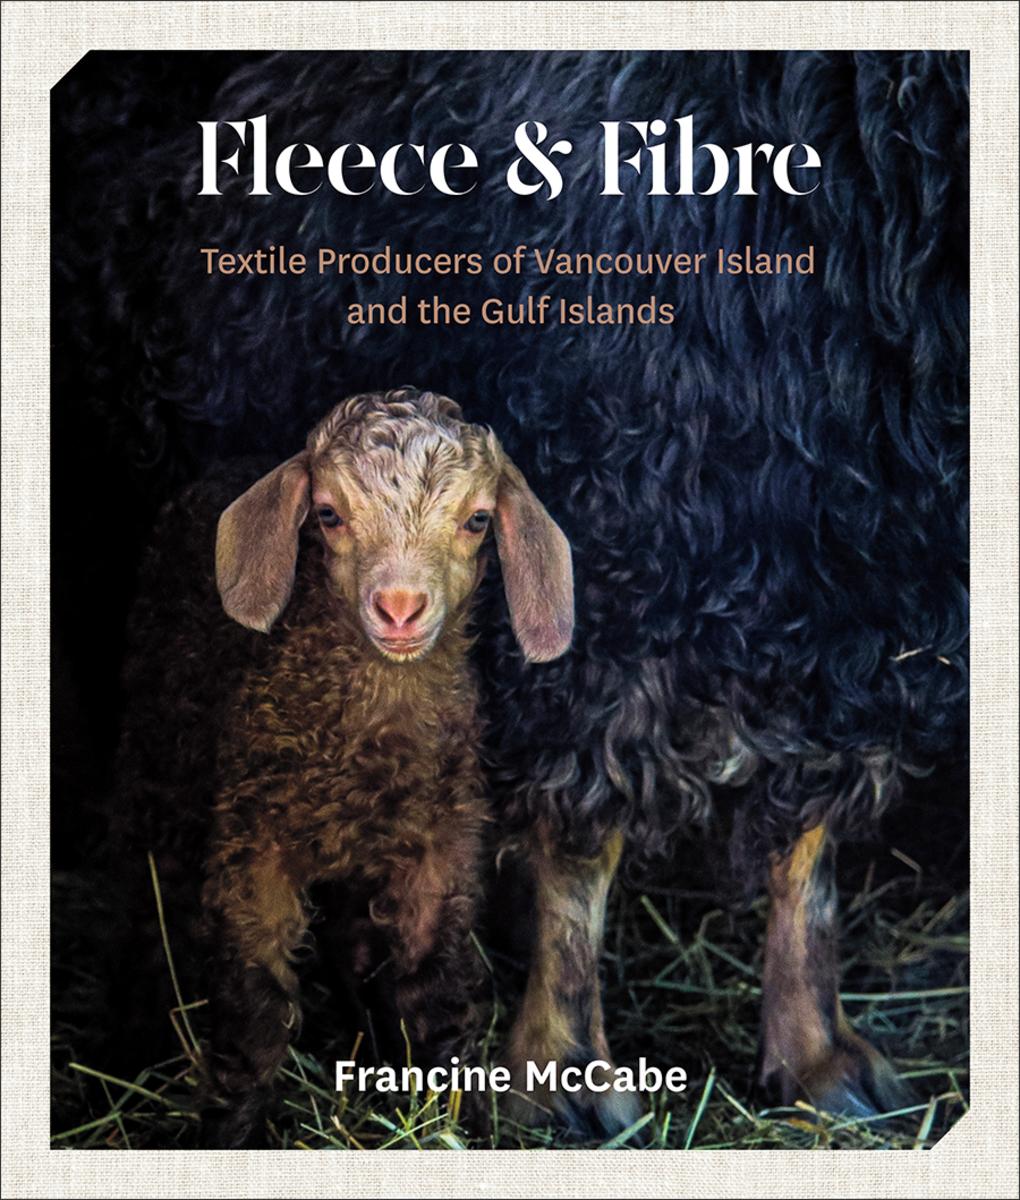 Fleece and Fibre - Textile Producers of Vancouver Island and the Gulf Islands